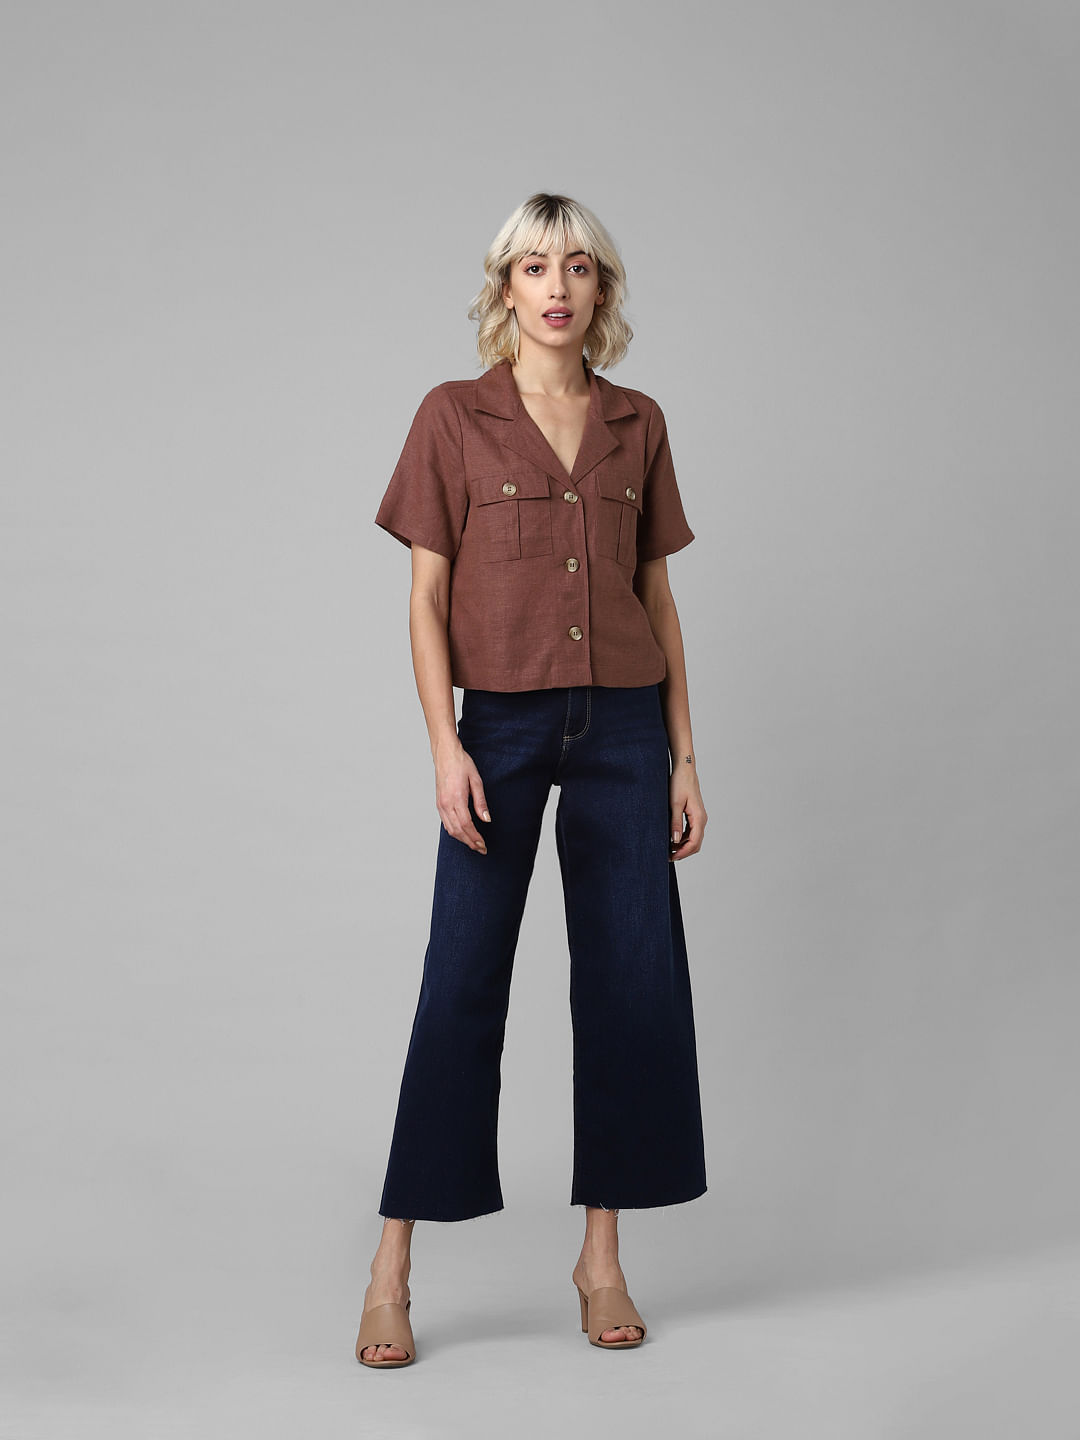 Buy Dash and Dot Grey Linen Asymmetric Shirt With Pant Online  Aza Fashions